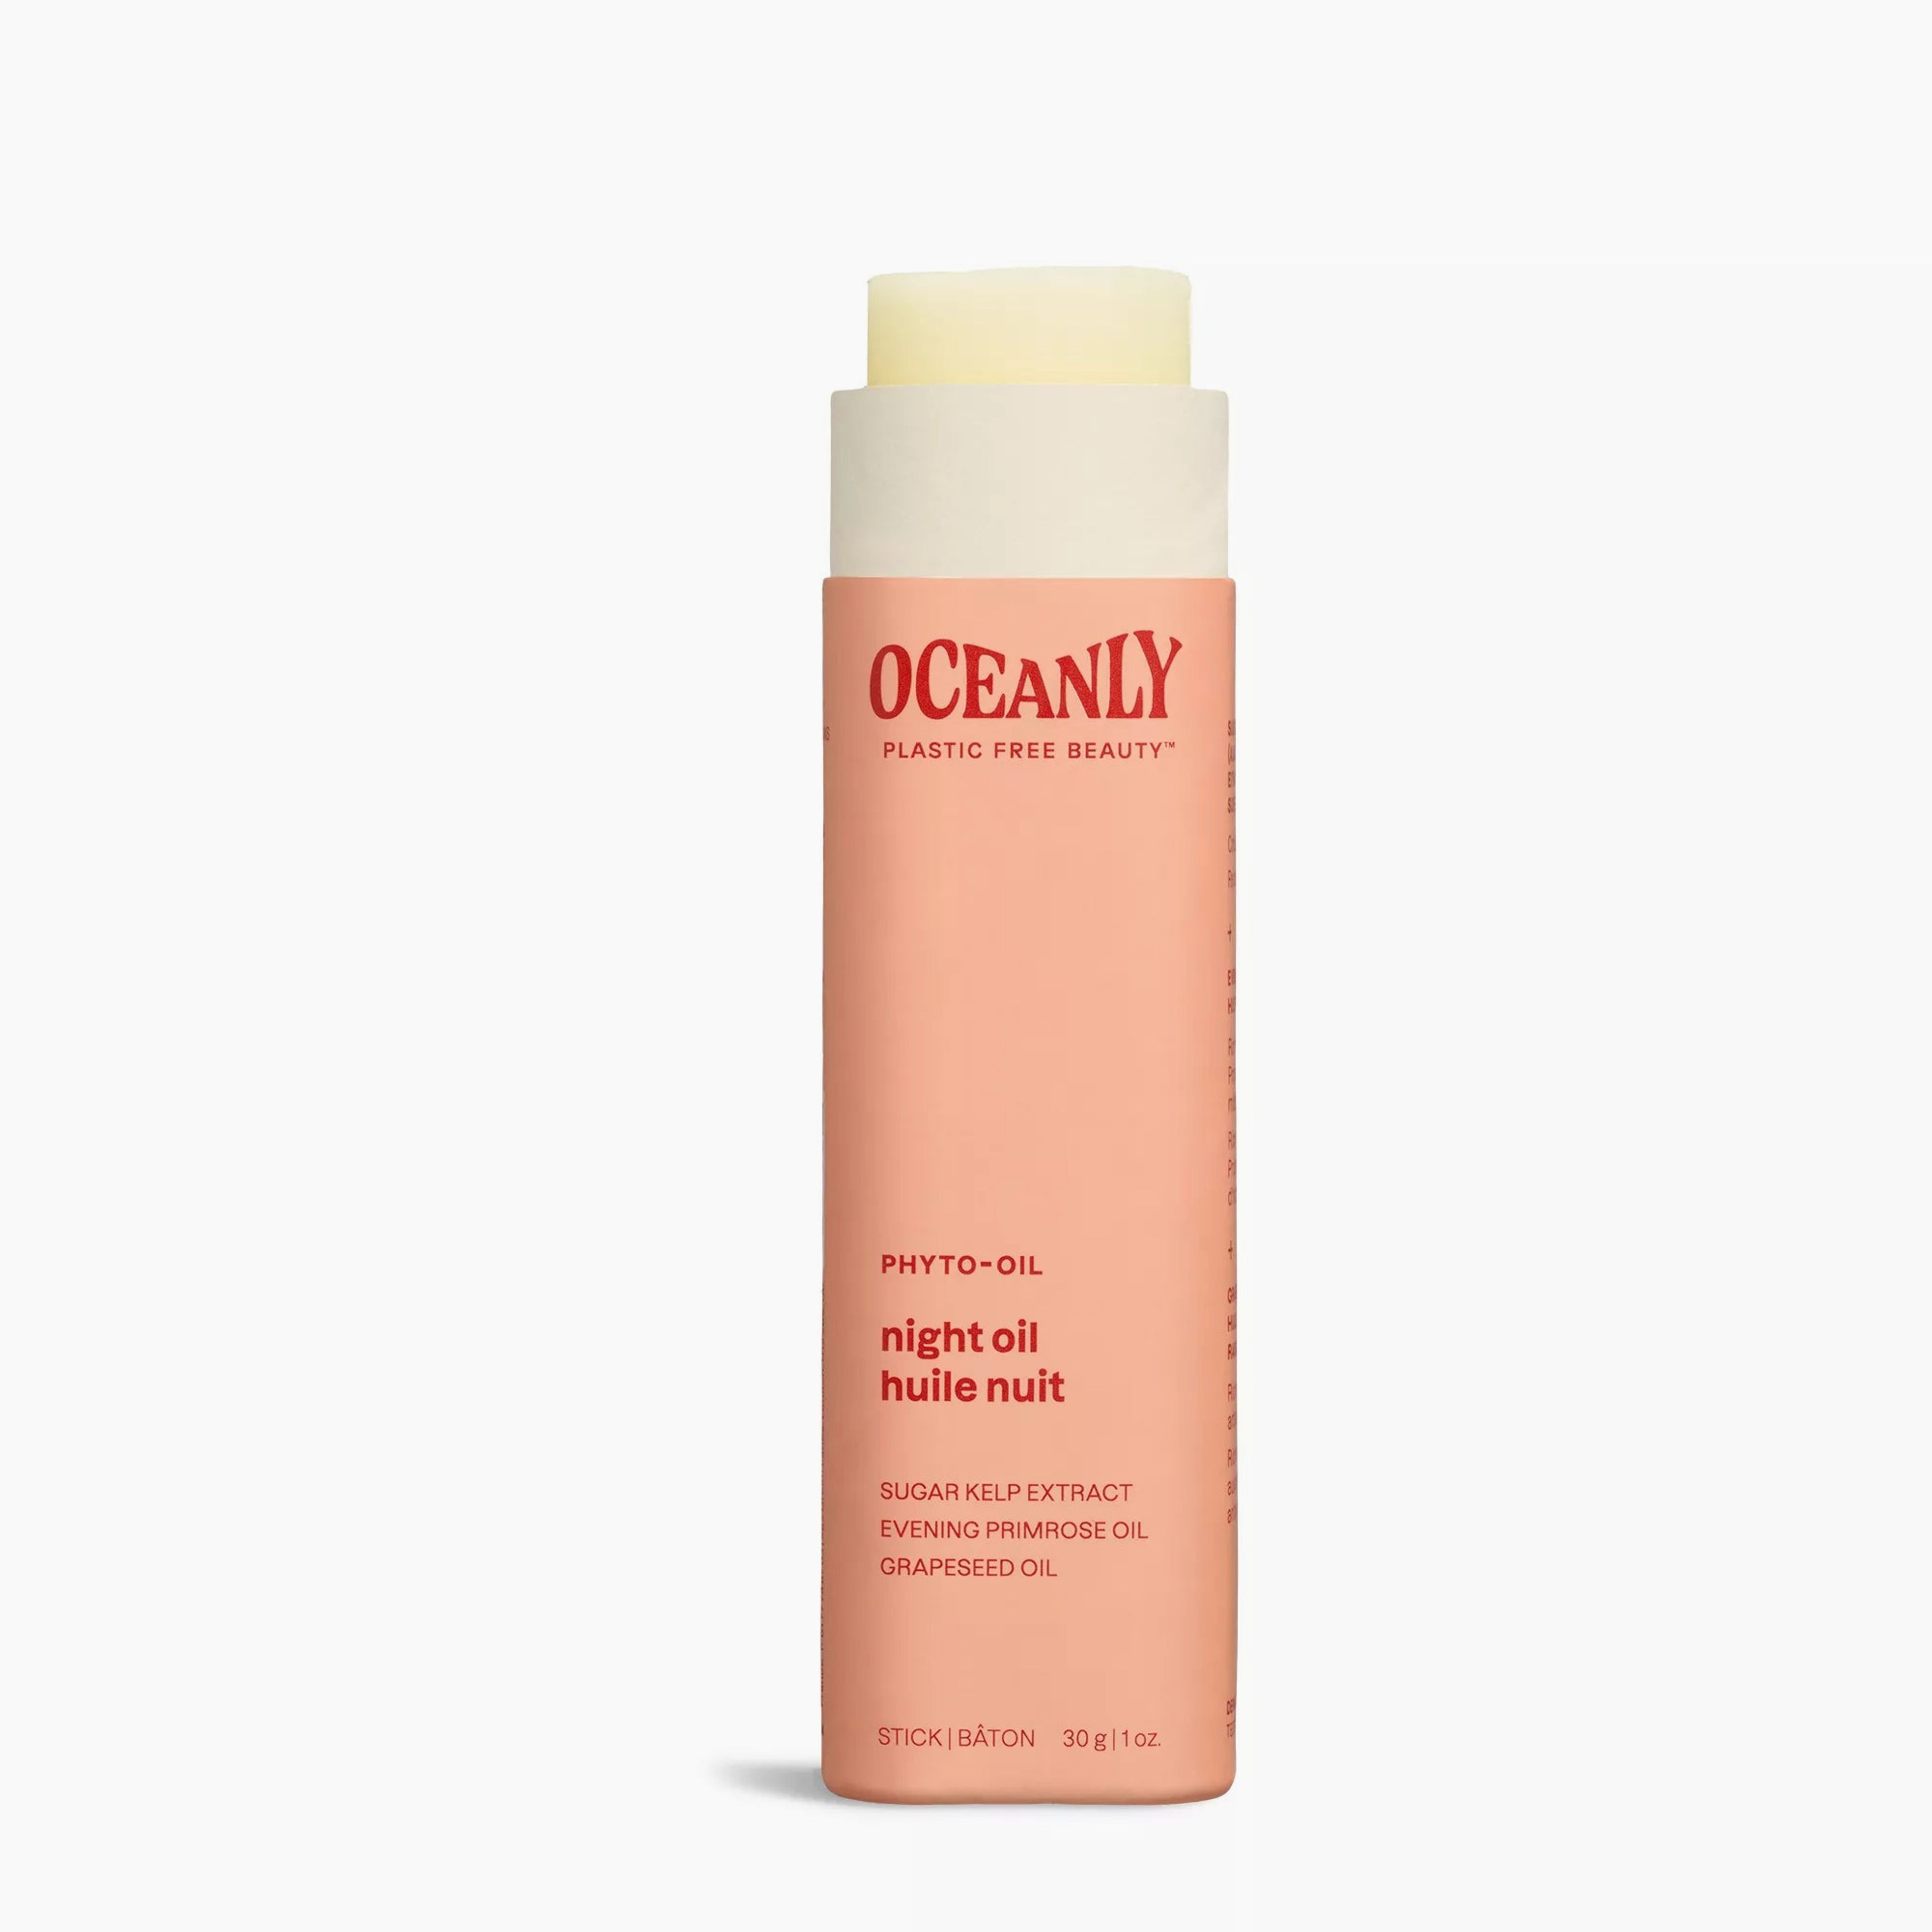 Nourishing Solid Night Oil with Evening Primrose Oil : Oceanly - Phyto-Oil